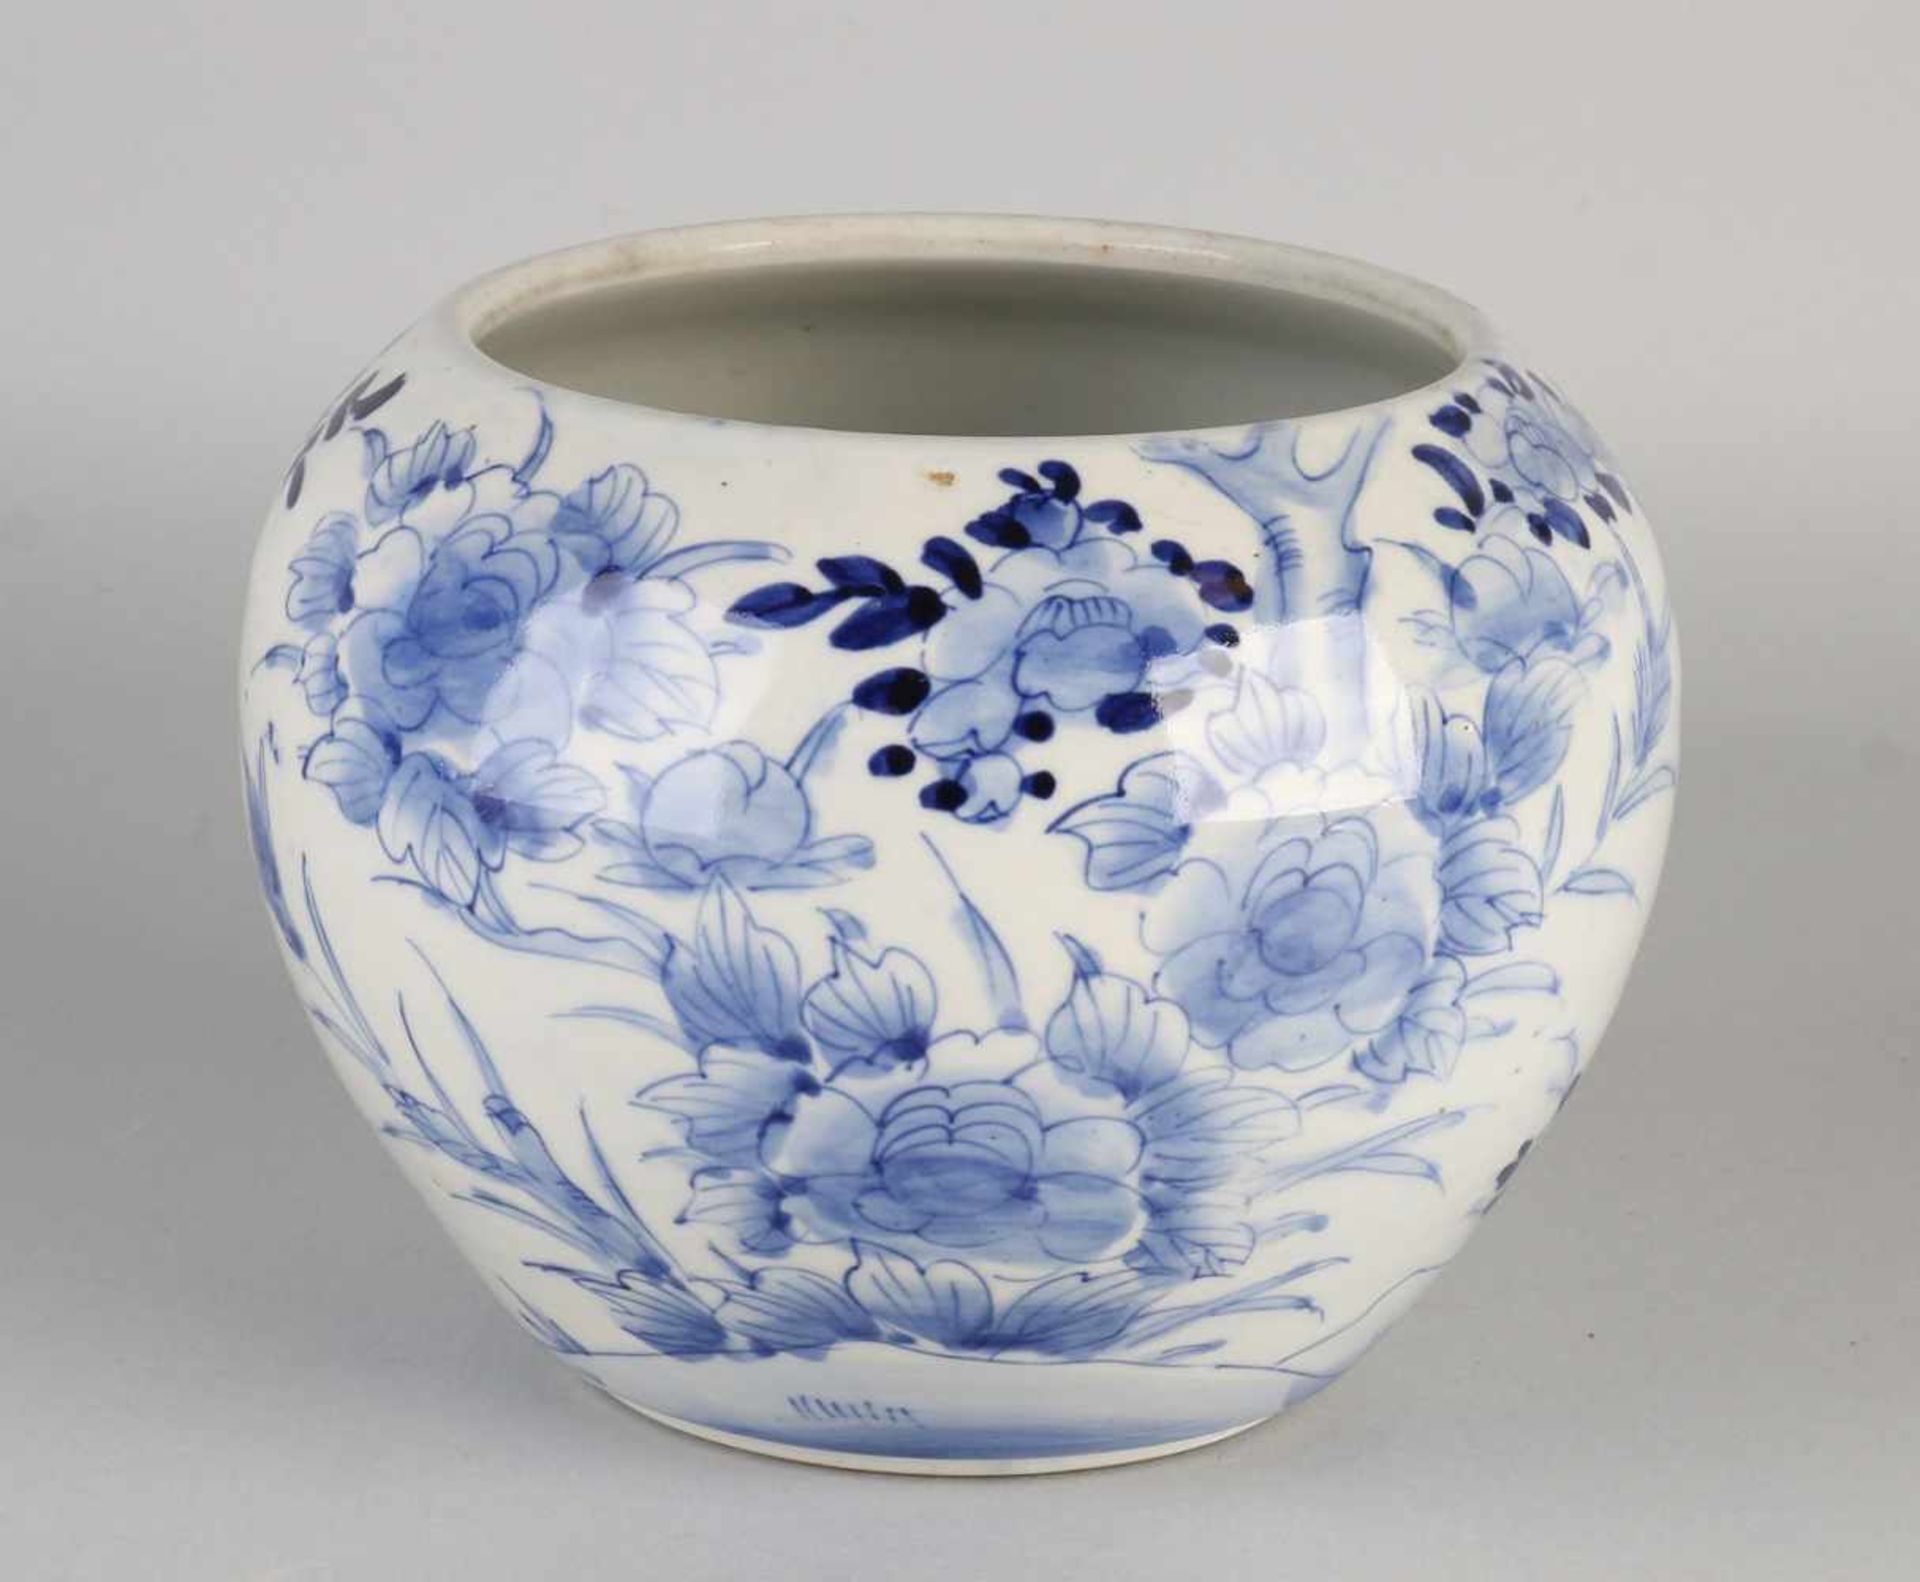 18th Century Chinese and Japanese porcelain pot with garden / butterfly decor. Size: ø 16 x 20 cm.